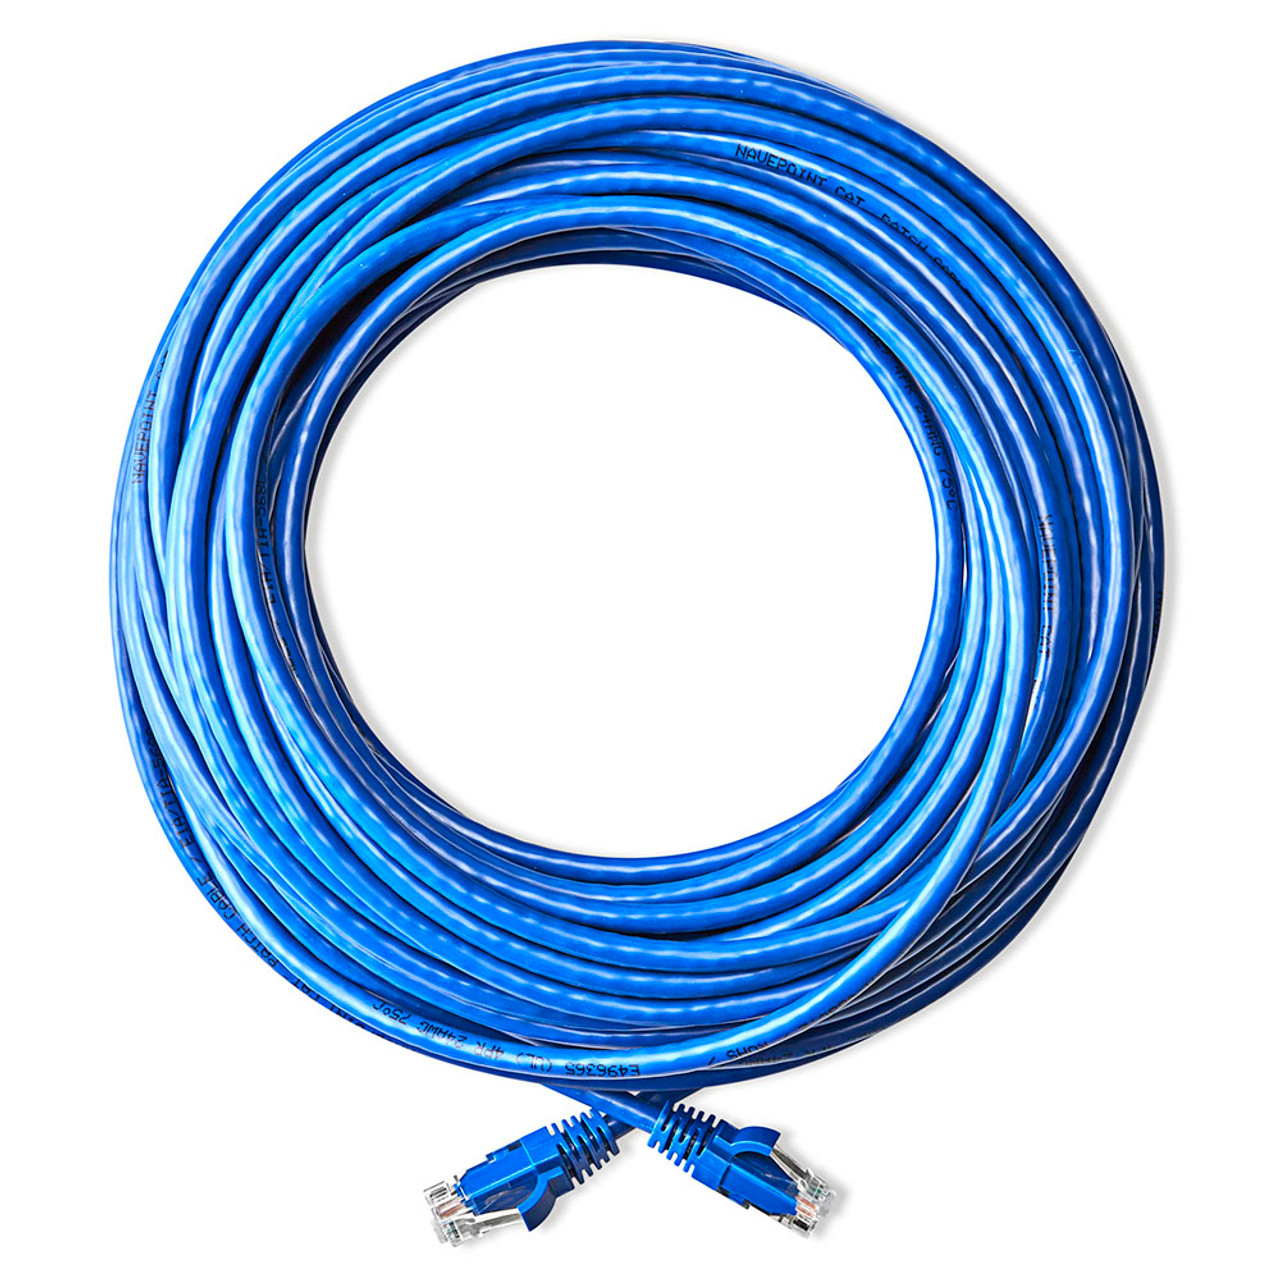 Blue NavePoint CAT5e UTP Ethernet Network RJ45 Snagless Patch Cable 75 Ft 